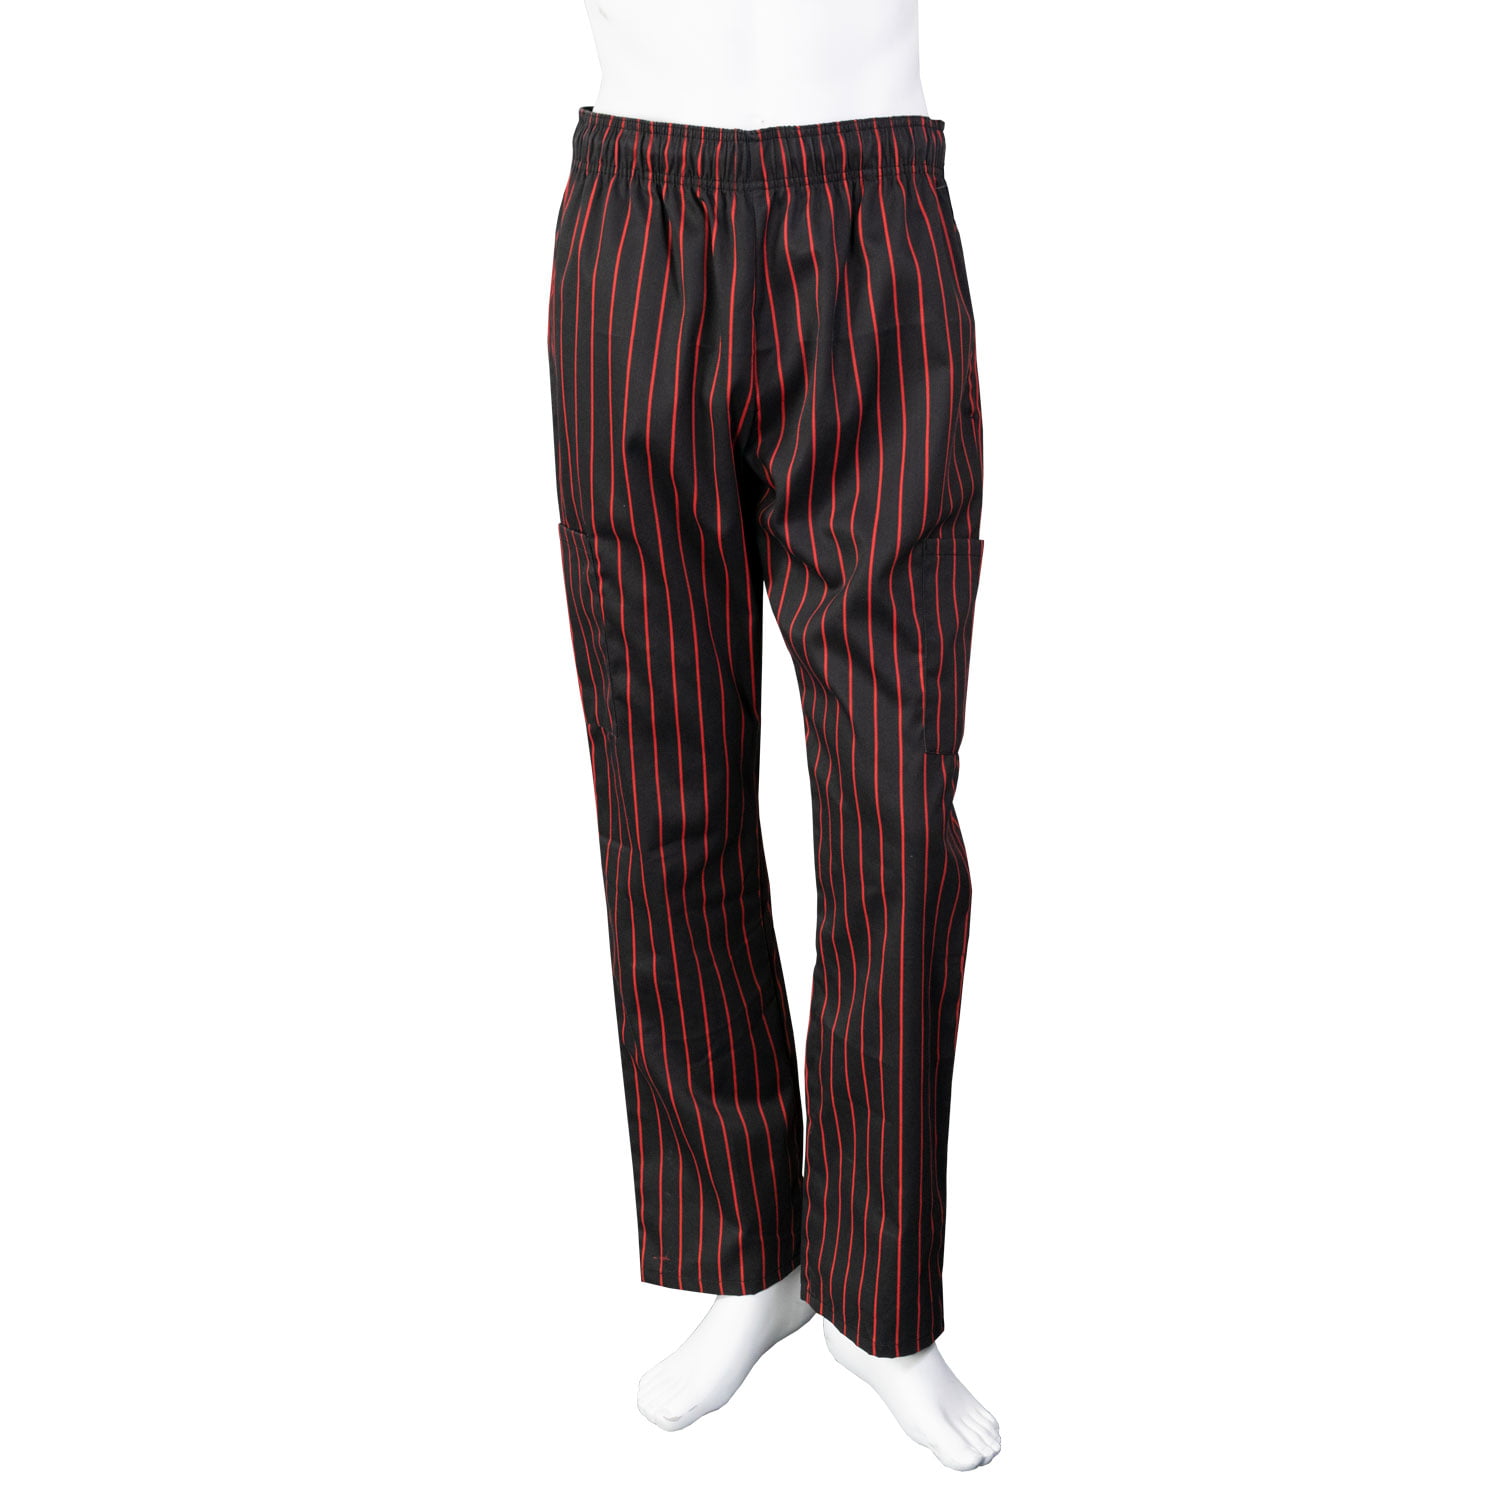 Size XS X Small 2 pairs inc 2 x Chefworks Chef Trousers Pants Cuisine design 